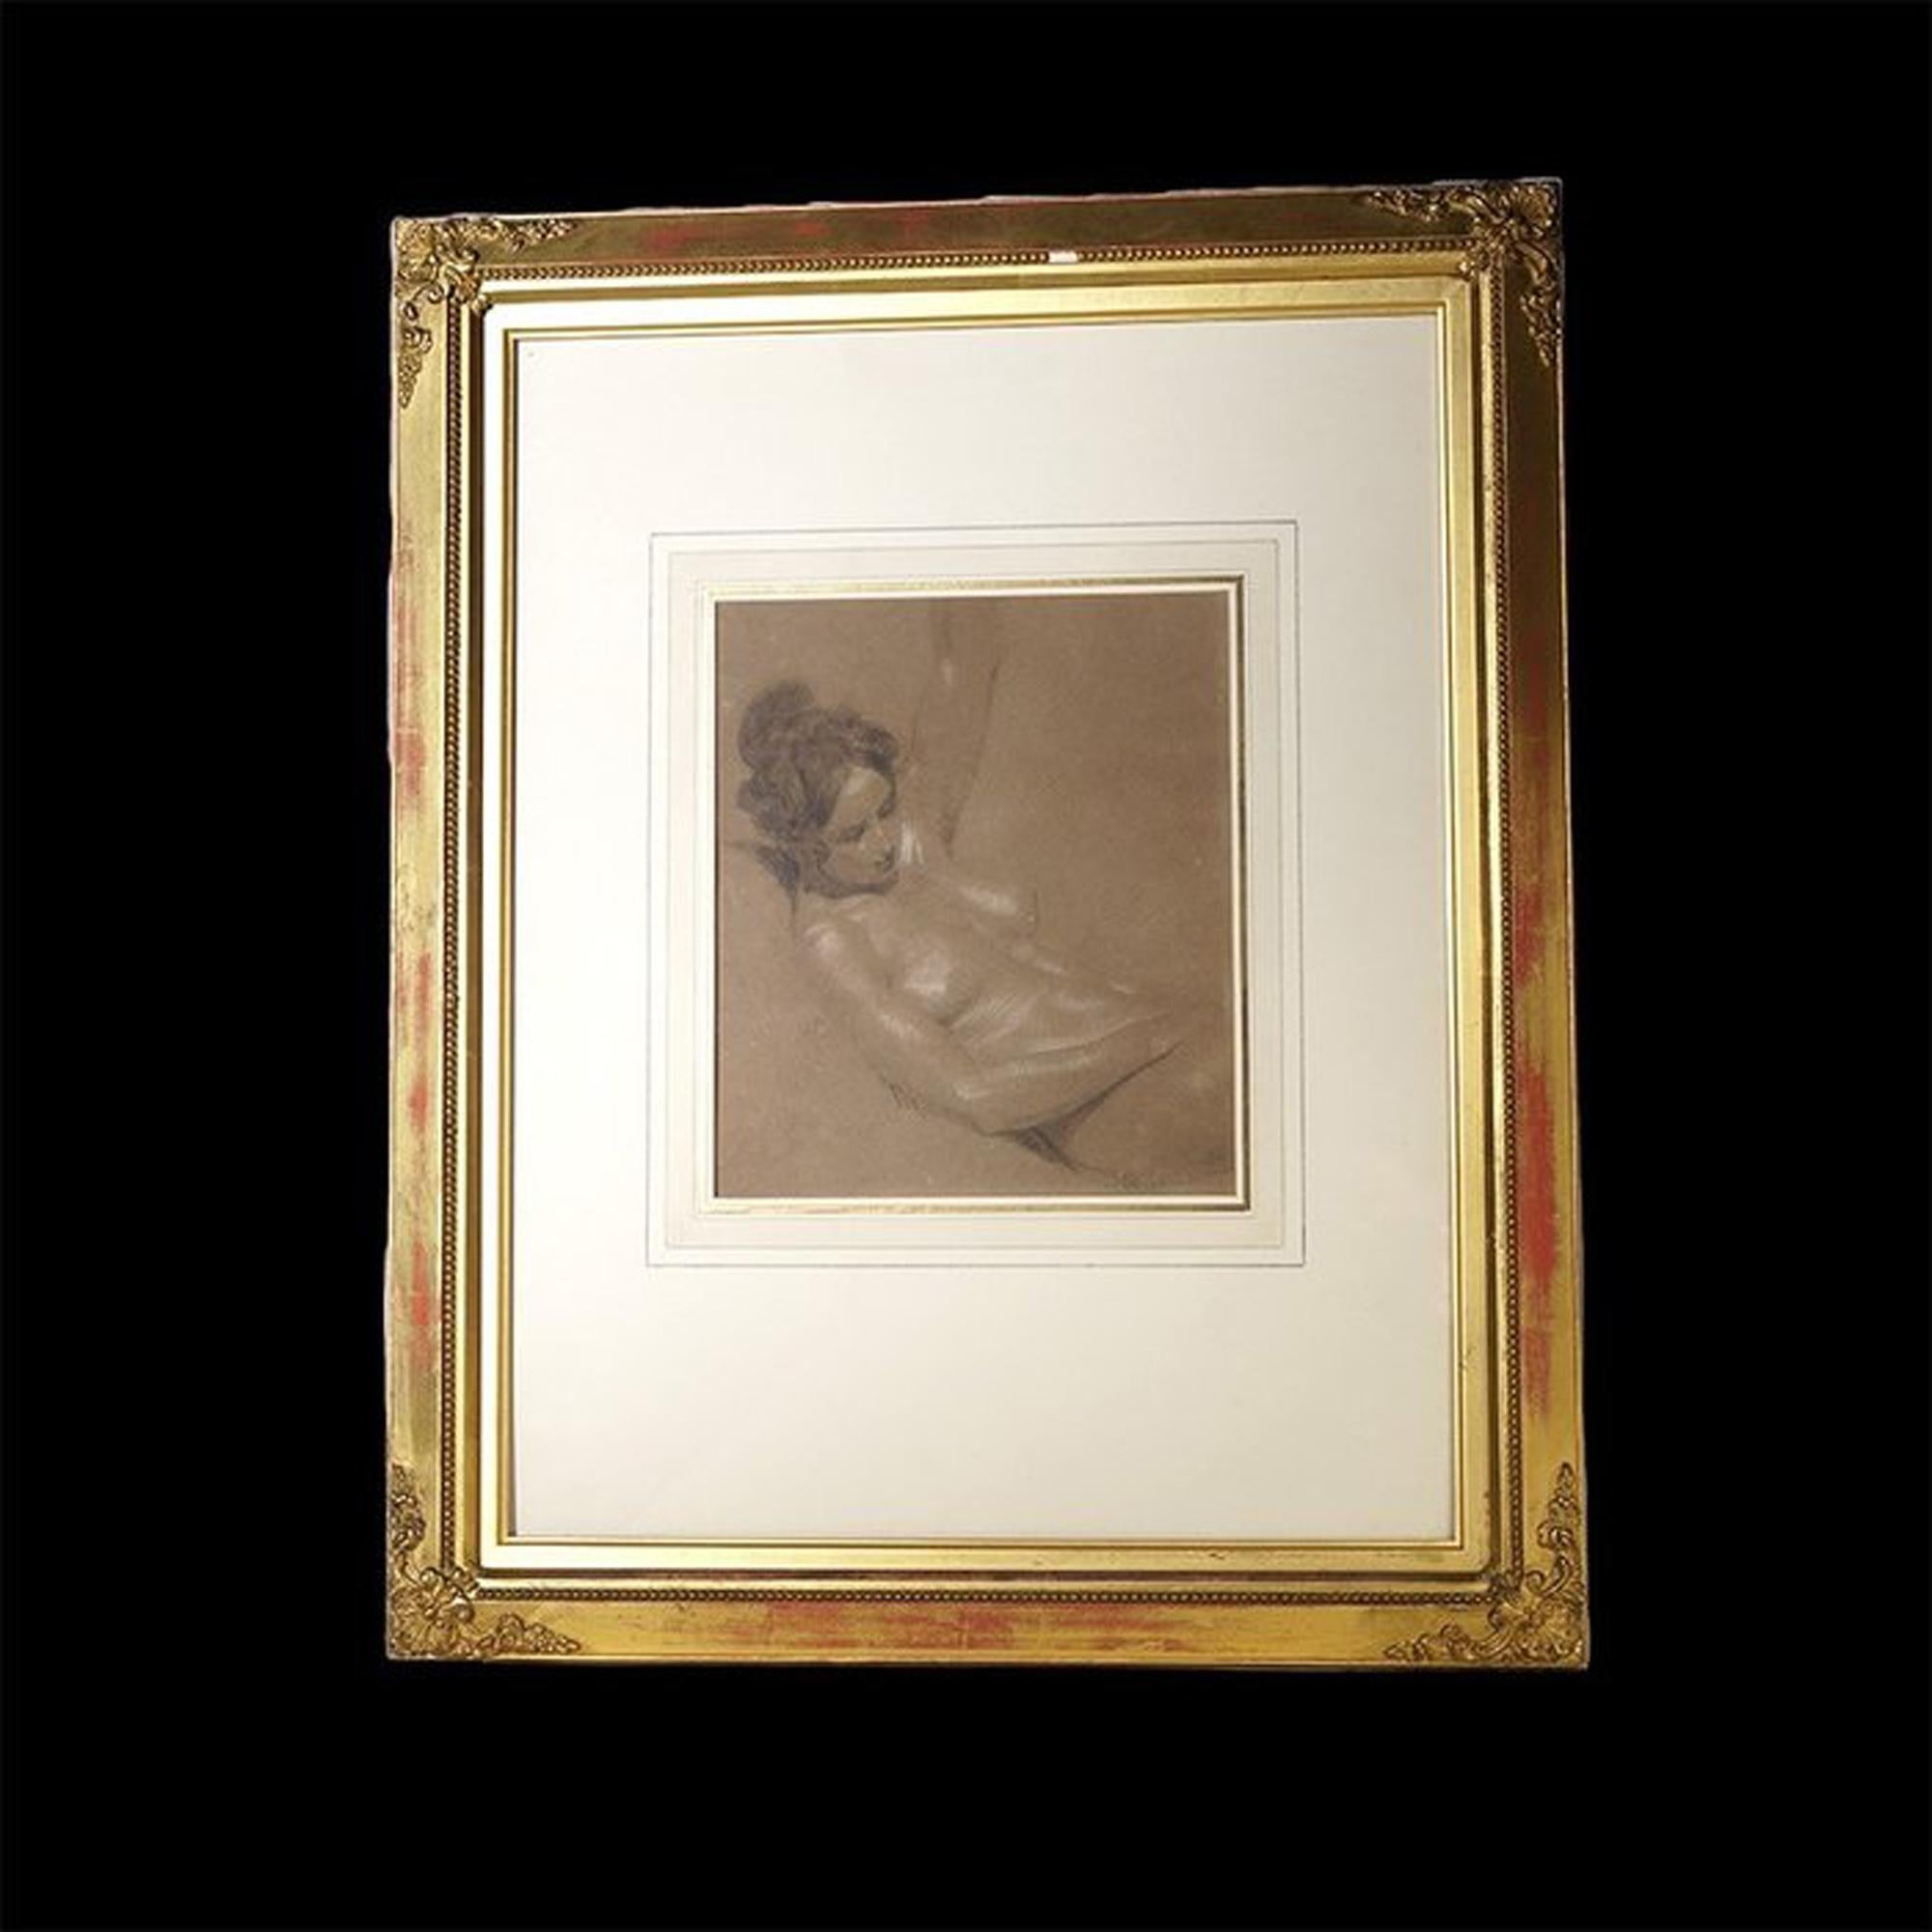 19th-century oil-on-paper drawing '' Female nude study '' by an artist of The English School William Etty

Provenance:
The drawing came from private collection of Henry Sapio Reitlinger.
Then been sold in one of the auction houses
and then acquired